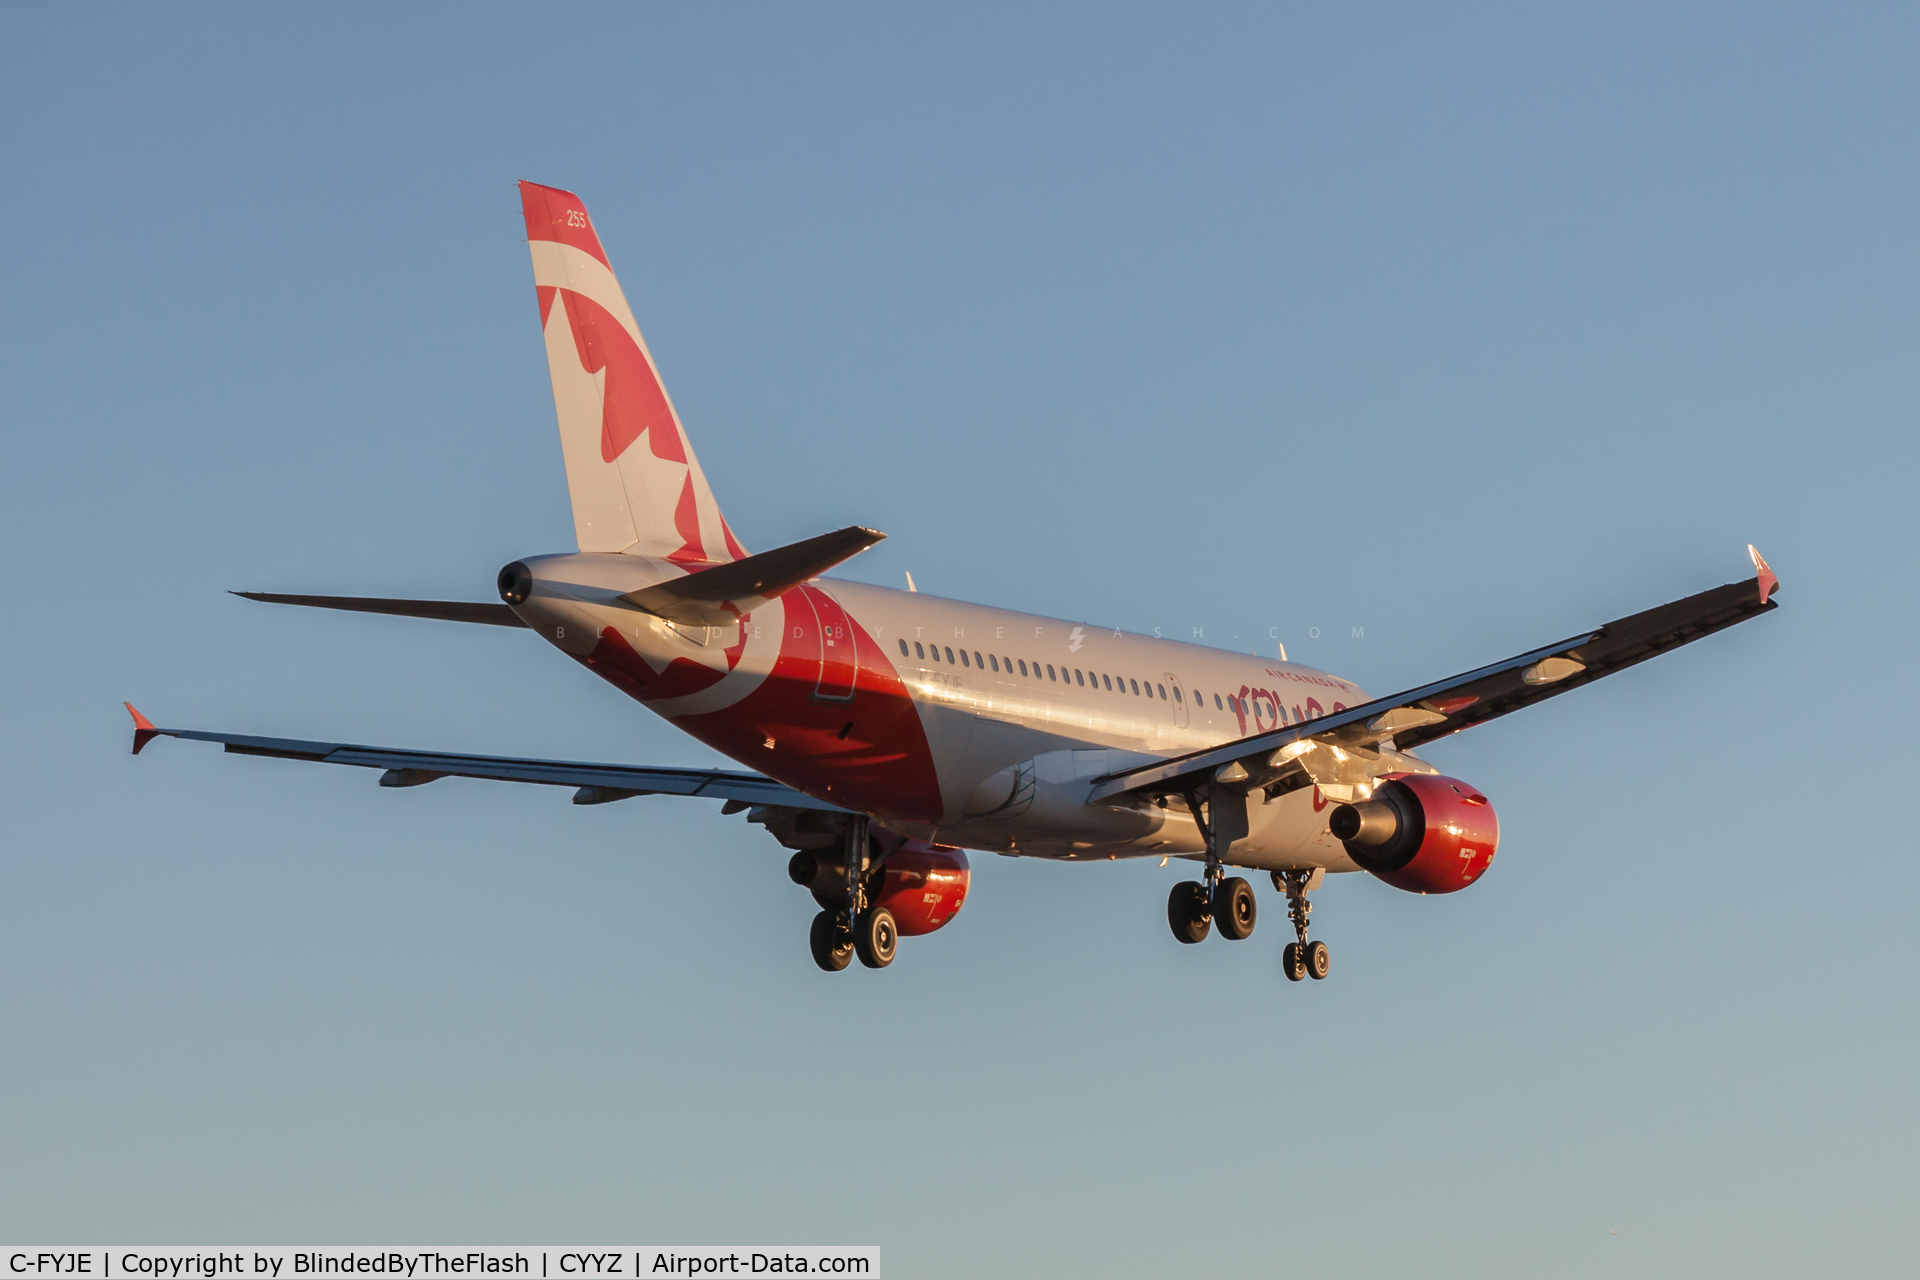 C-FYJE, 1996 Airbus A319-114 C/N 656, Short final for runway 23 at Toronto Pearson during the golden hour